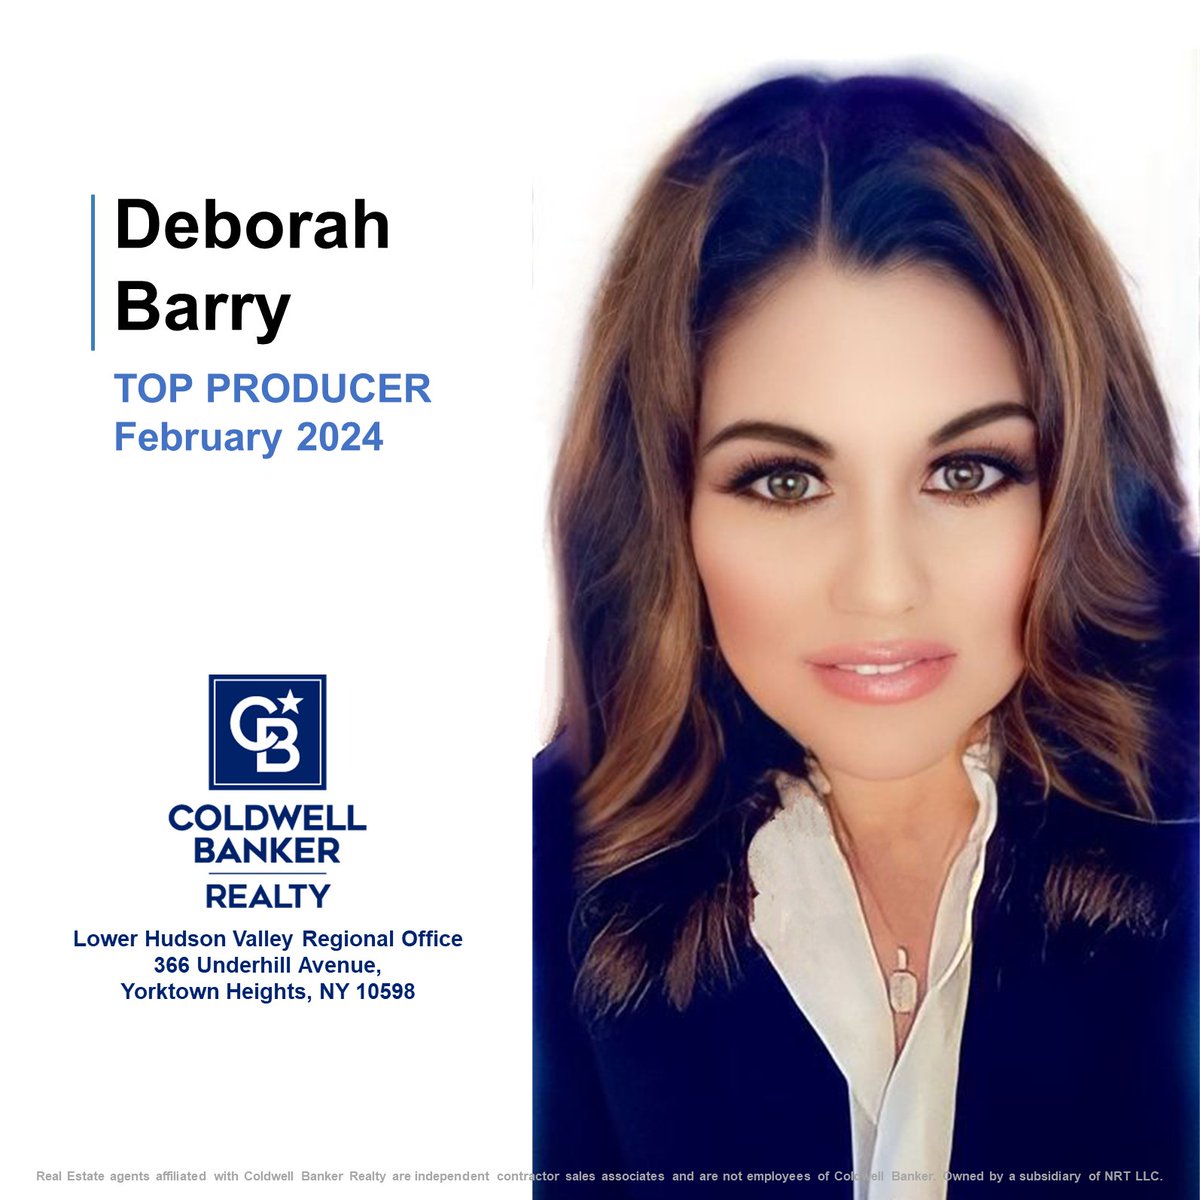 Congratulations to Deborah Barry on being February’s Top Producer.
Your dedication and hard work is greatly appreciated!
#congratulations #cbr #ctwc #realestate #lhvro #cbproud #cbtheplacetobe #bestagent #agentofcoldwellbanker #deborahbarry